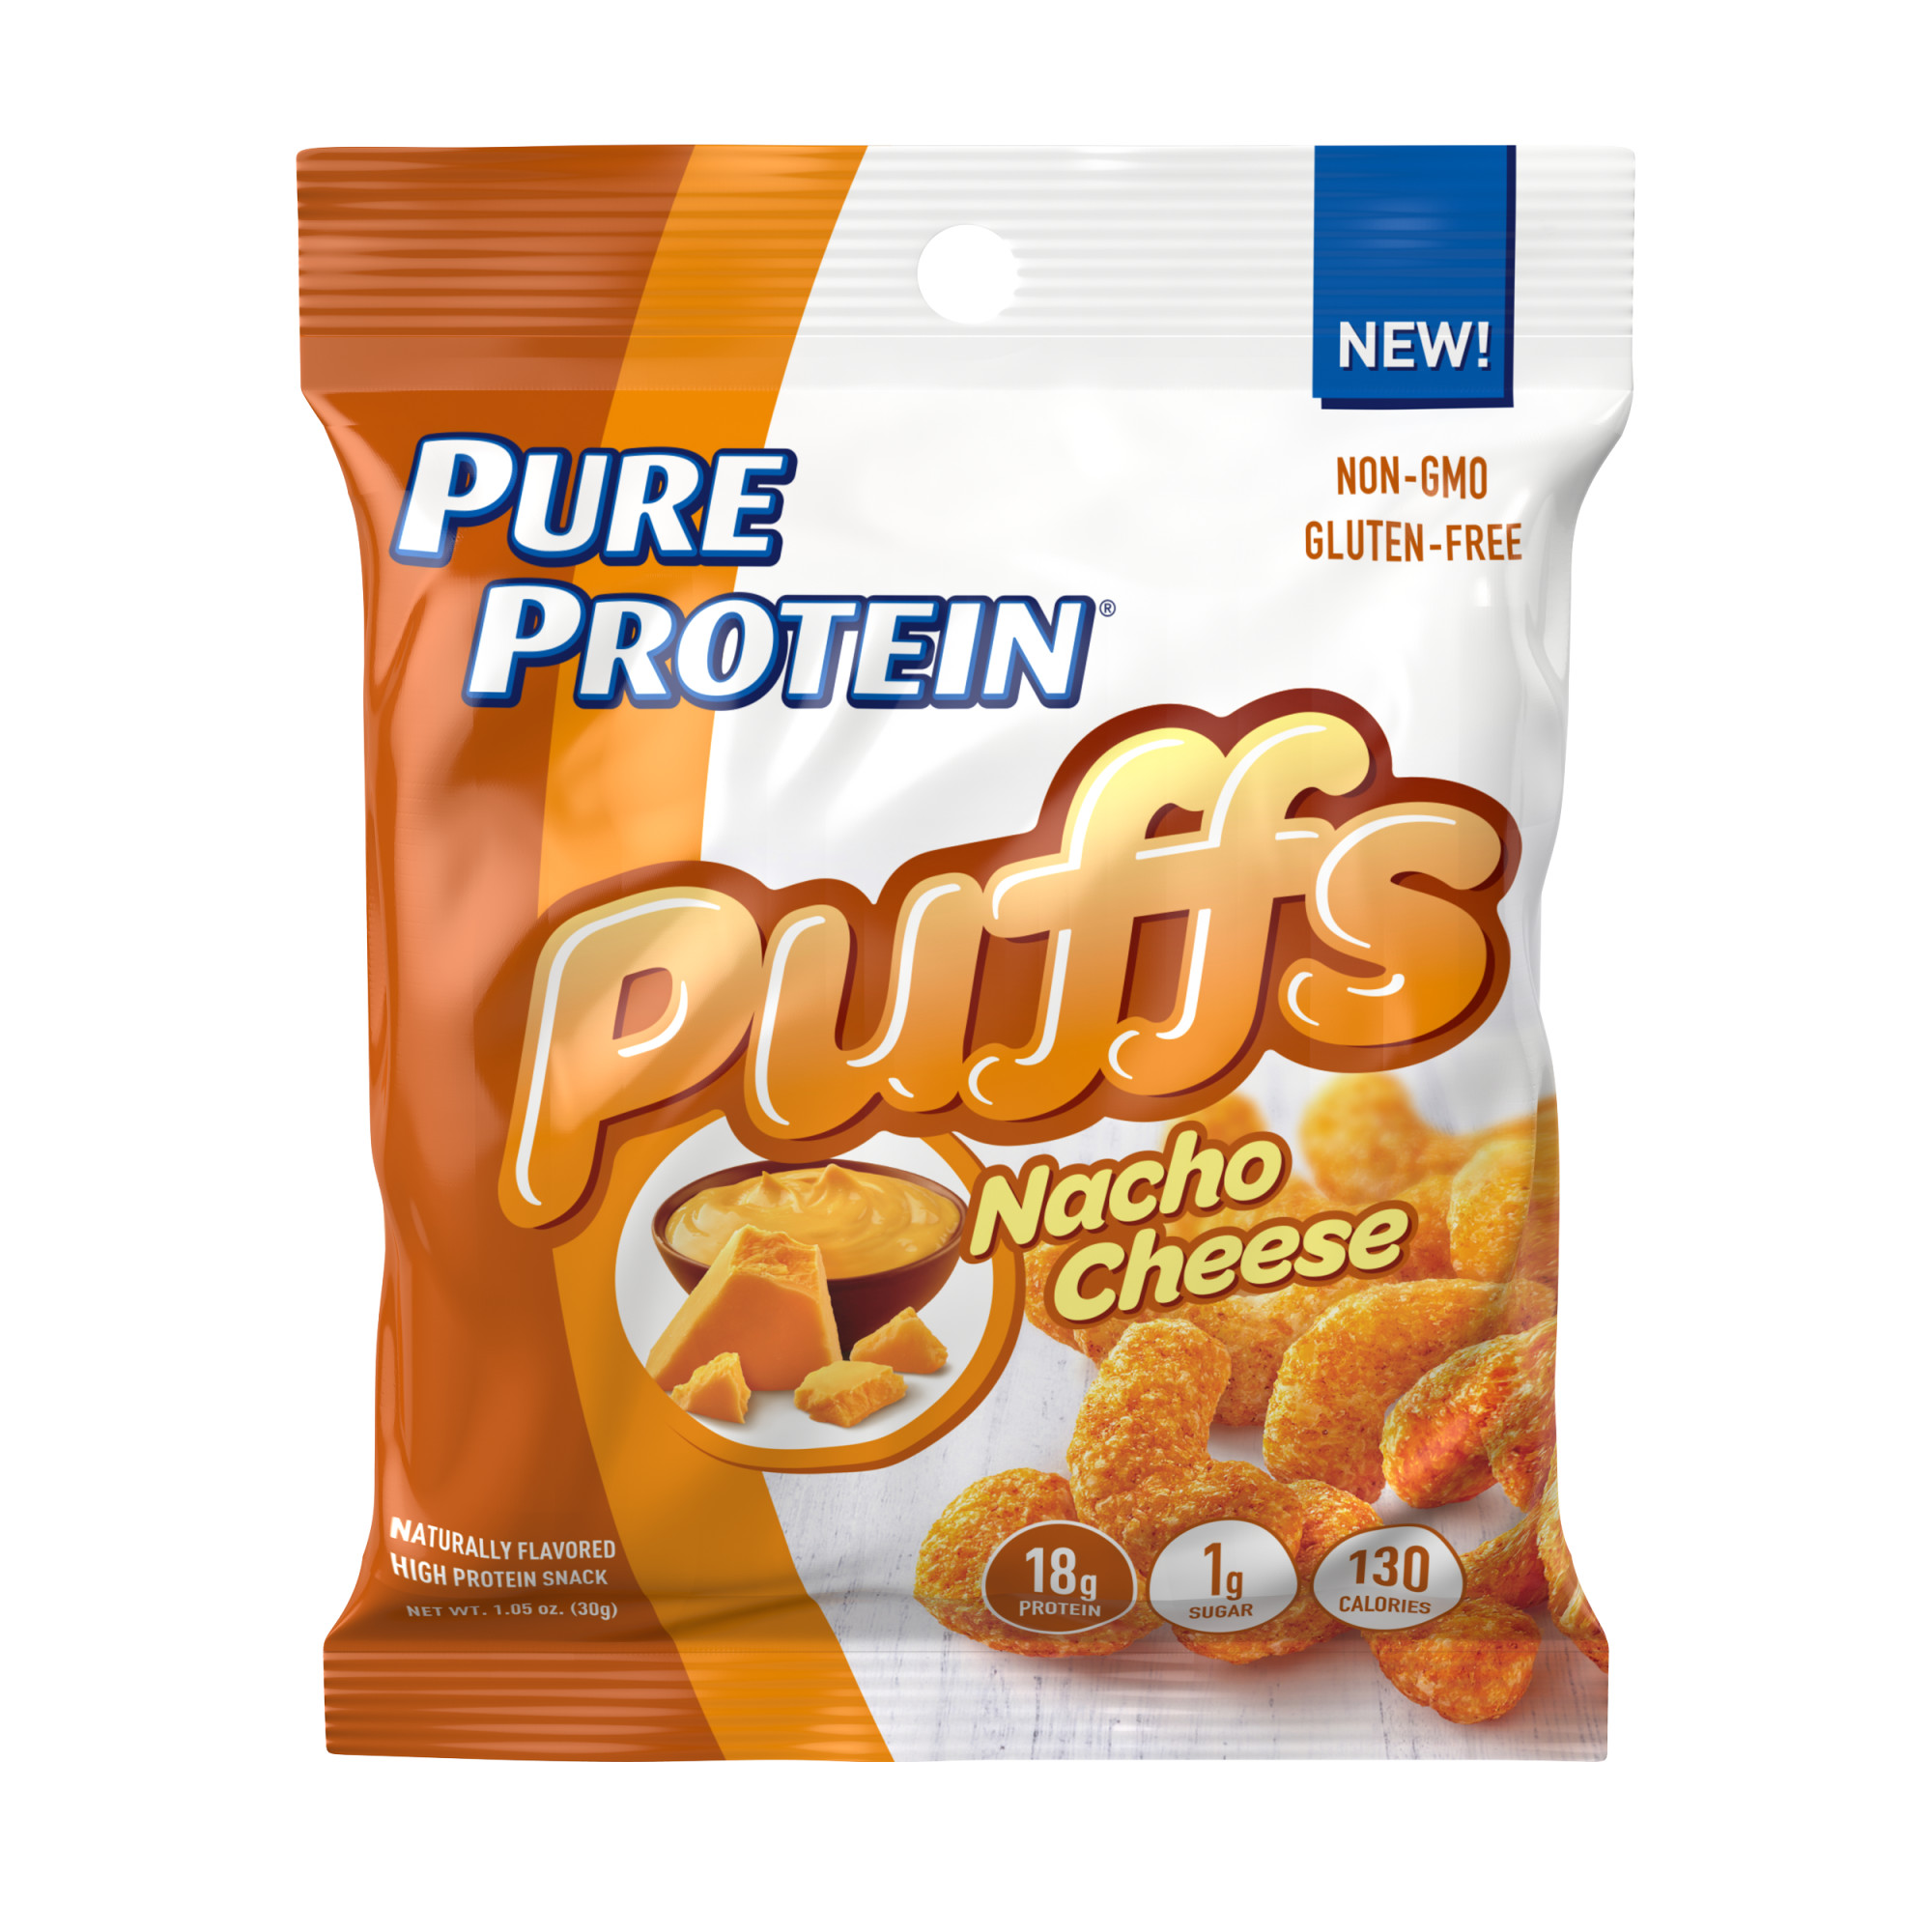 Pure Protein Puffs Snack, Nacho Cheese, 18g Protein, 1.05 oz, Single Pack - image 1 of 8